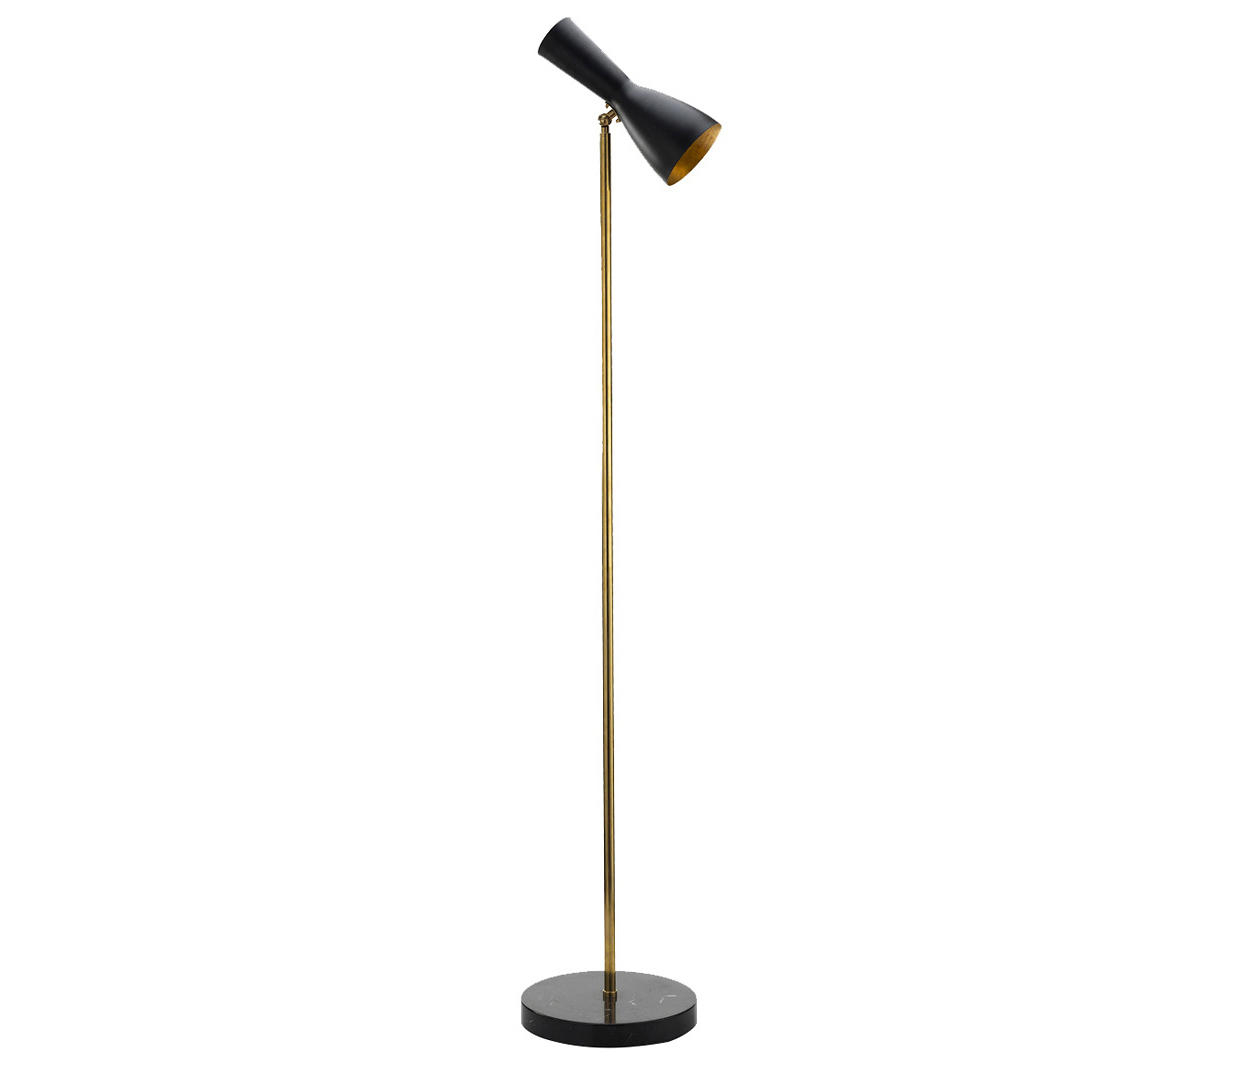 Wormhole Vintage Floor Lamp Architonic throughout sizing 1250 X 1068